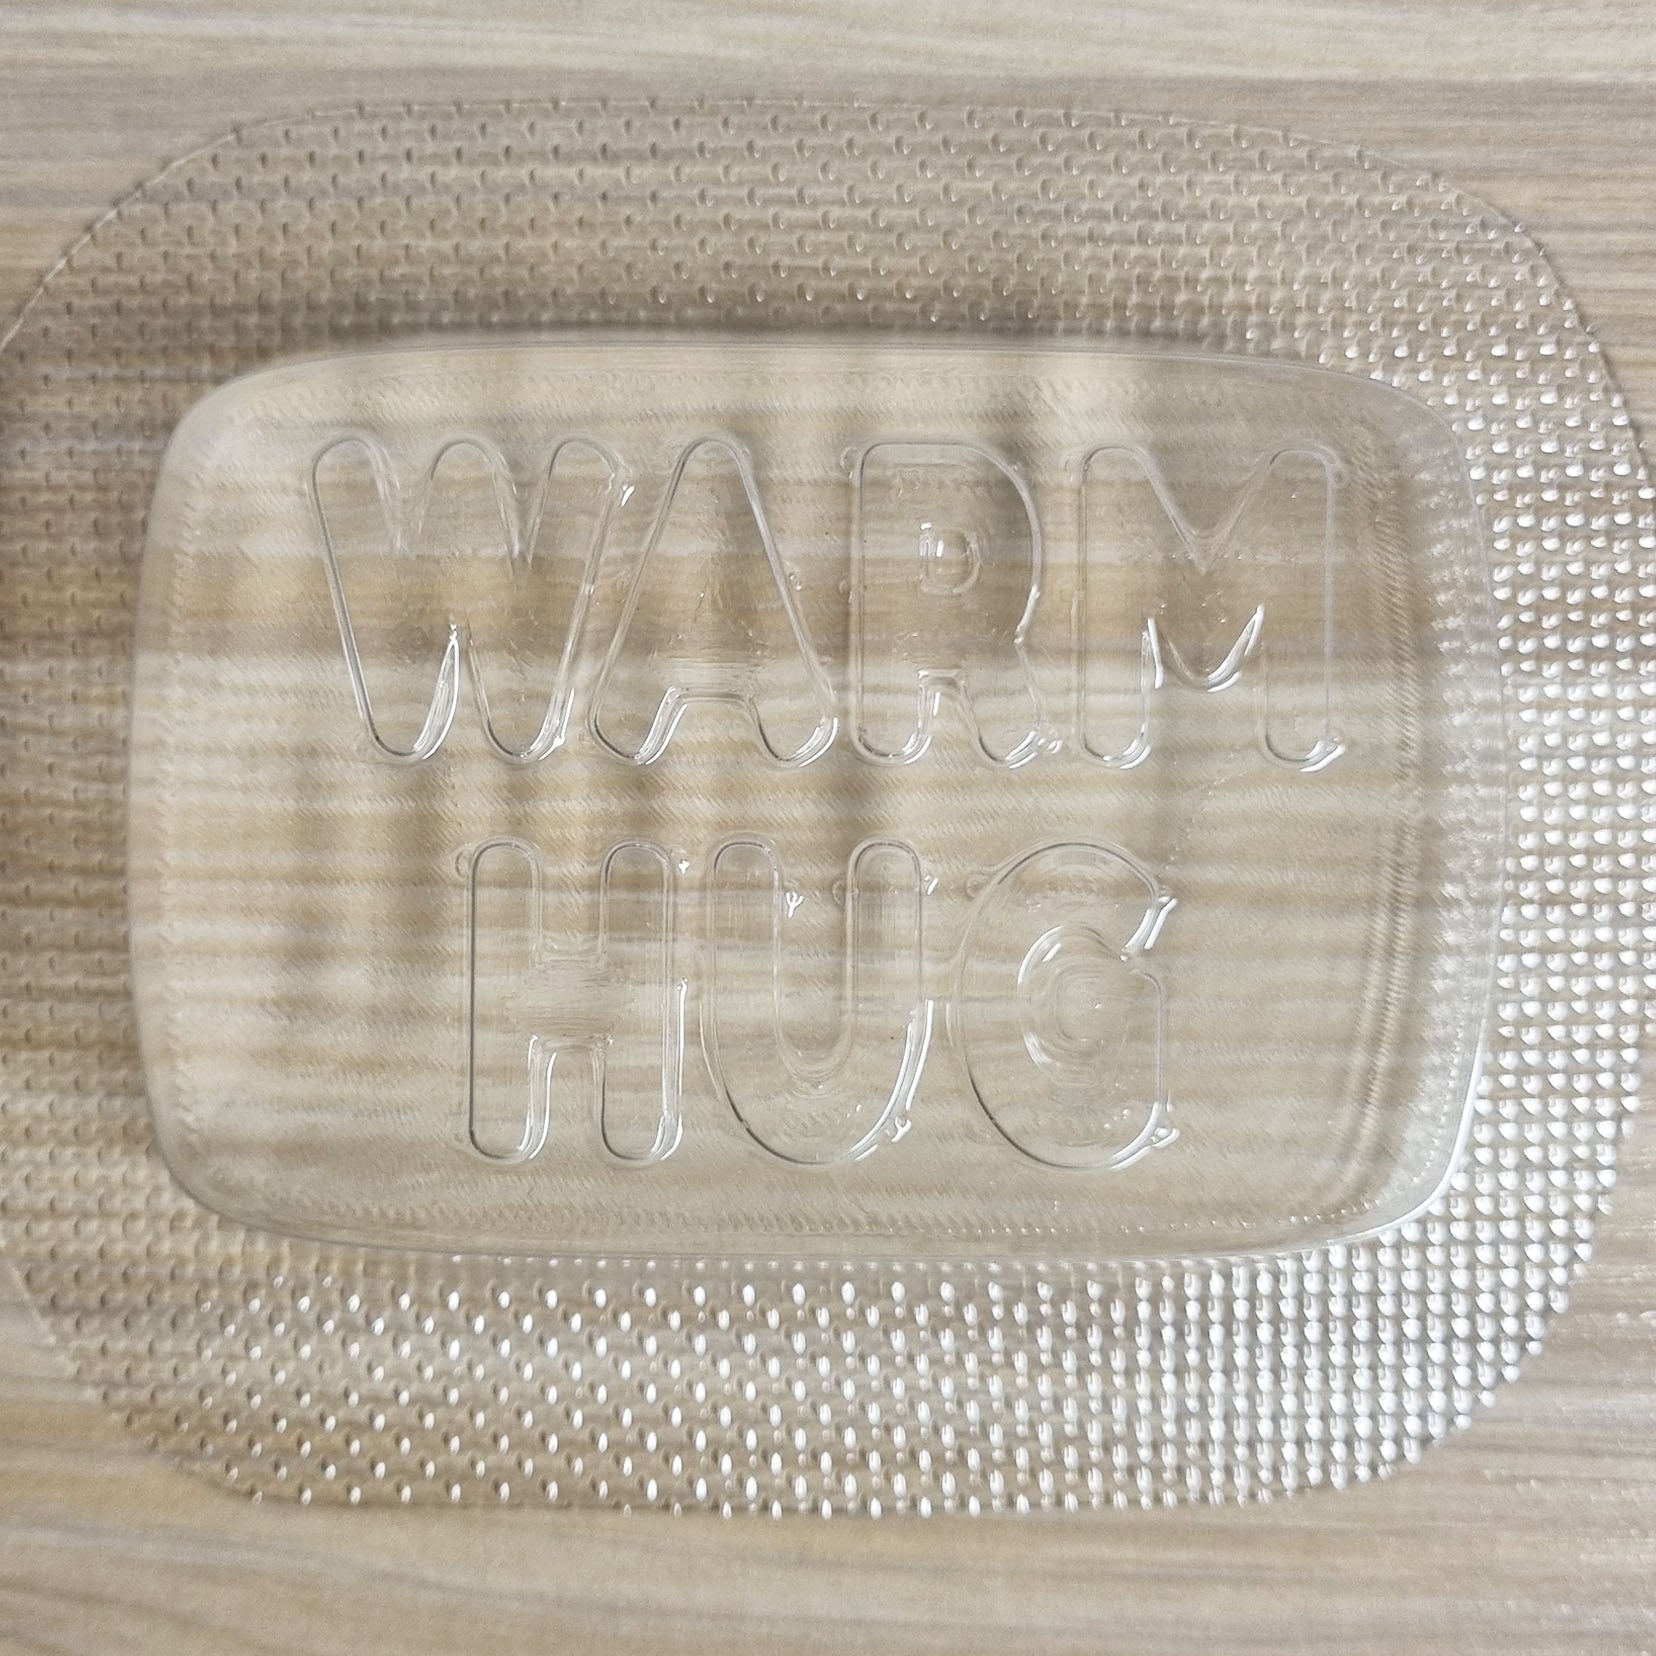 Warm Hug Mould | Truly Personal | Bath Bomb, Soap, Resin, Chocolate, Jelly, Wax Melts Mold